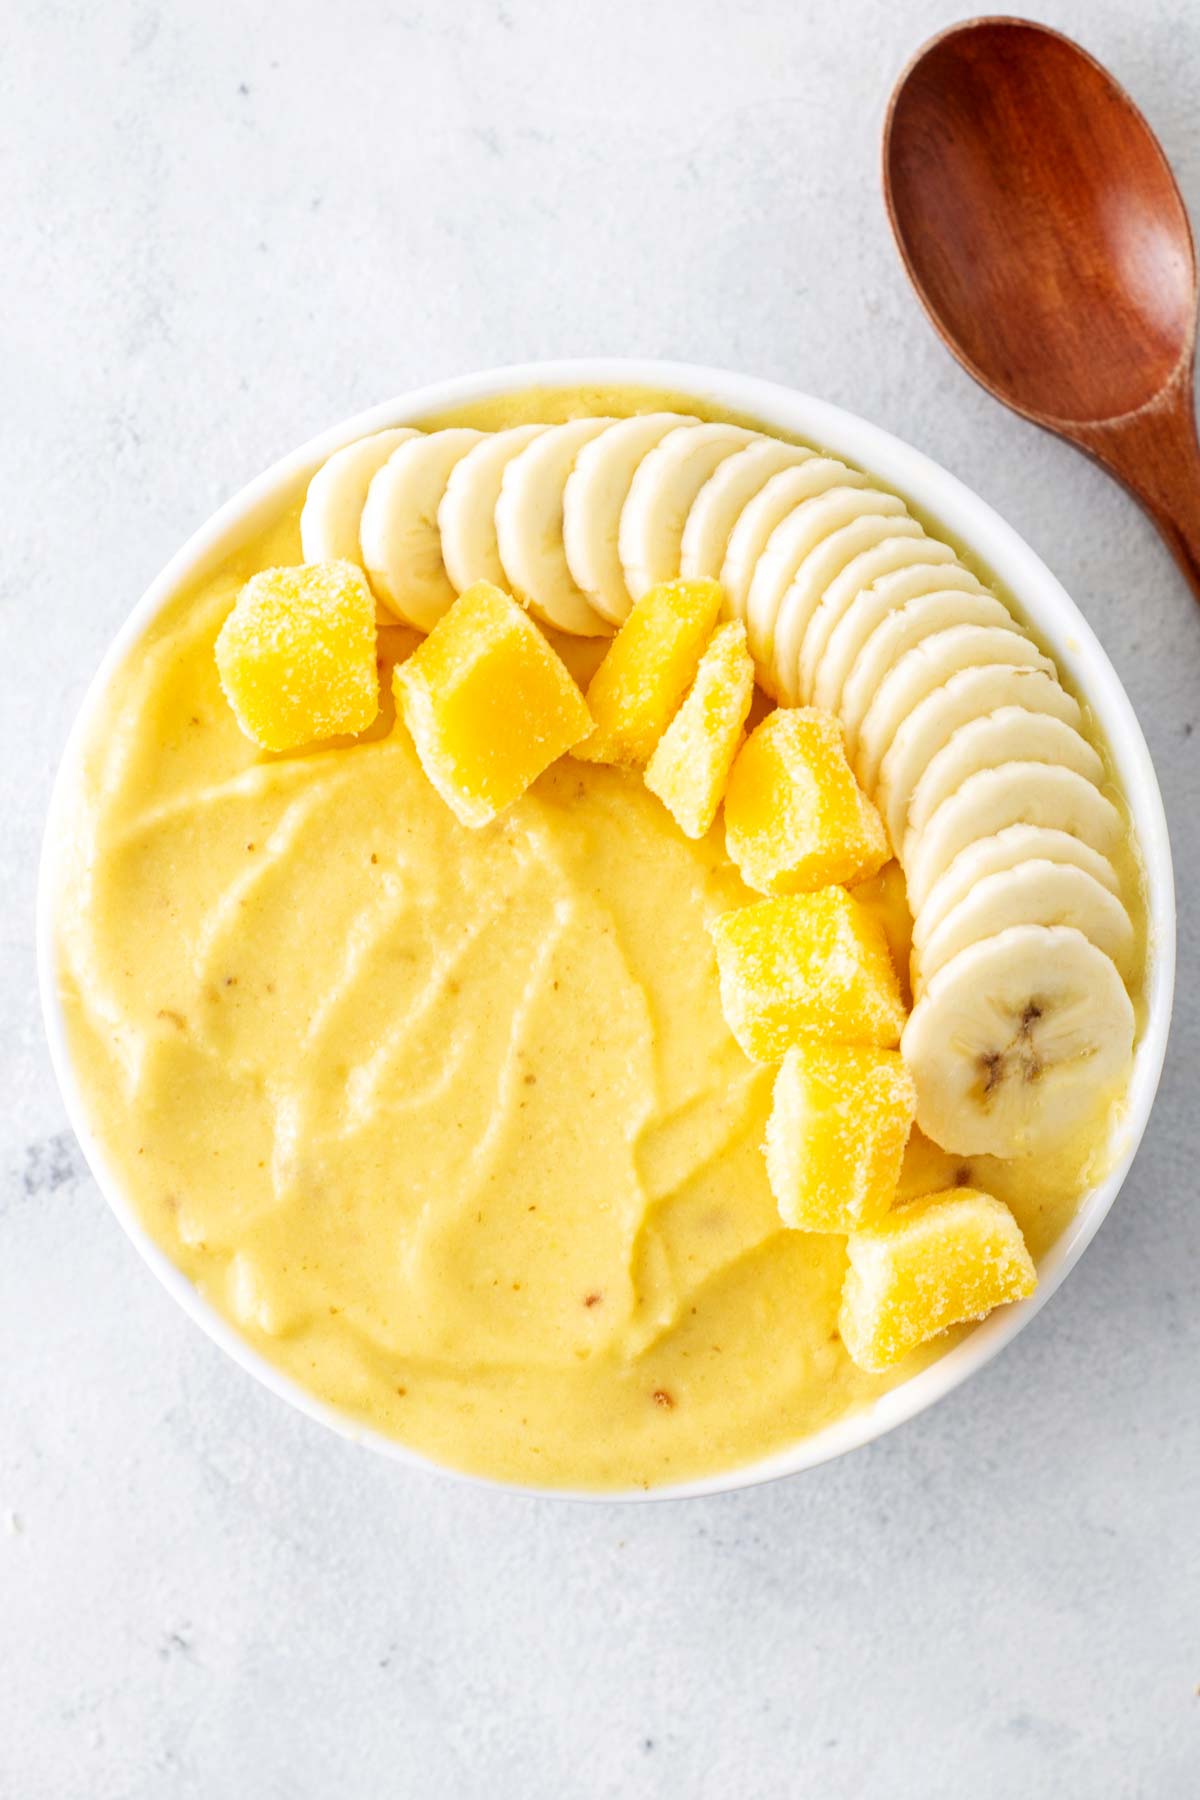 Mango smoothie bowl with a wooden spoon off to the side.